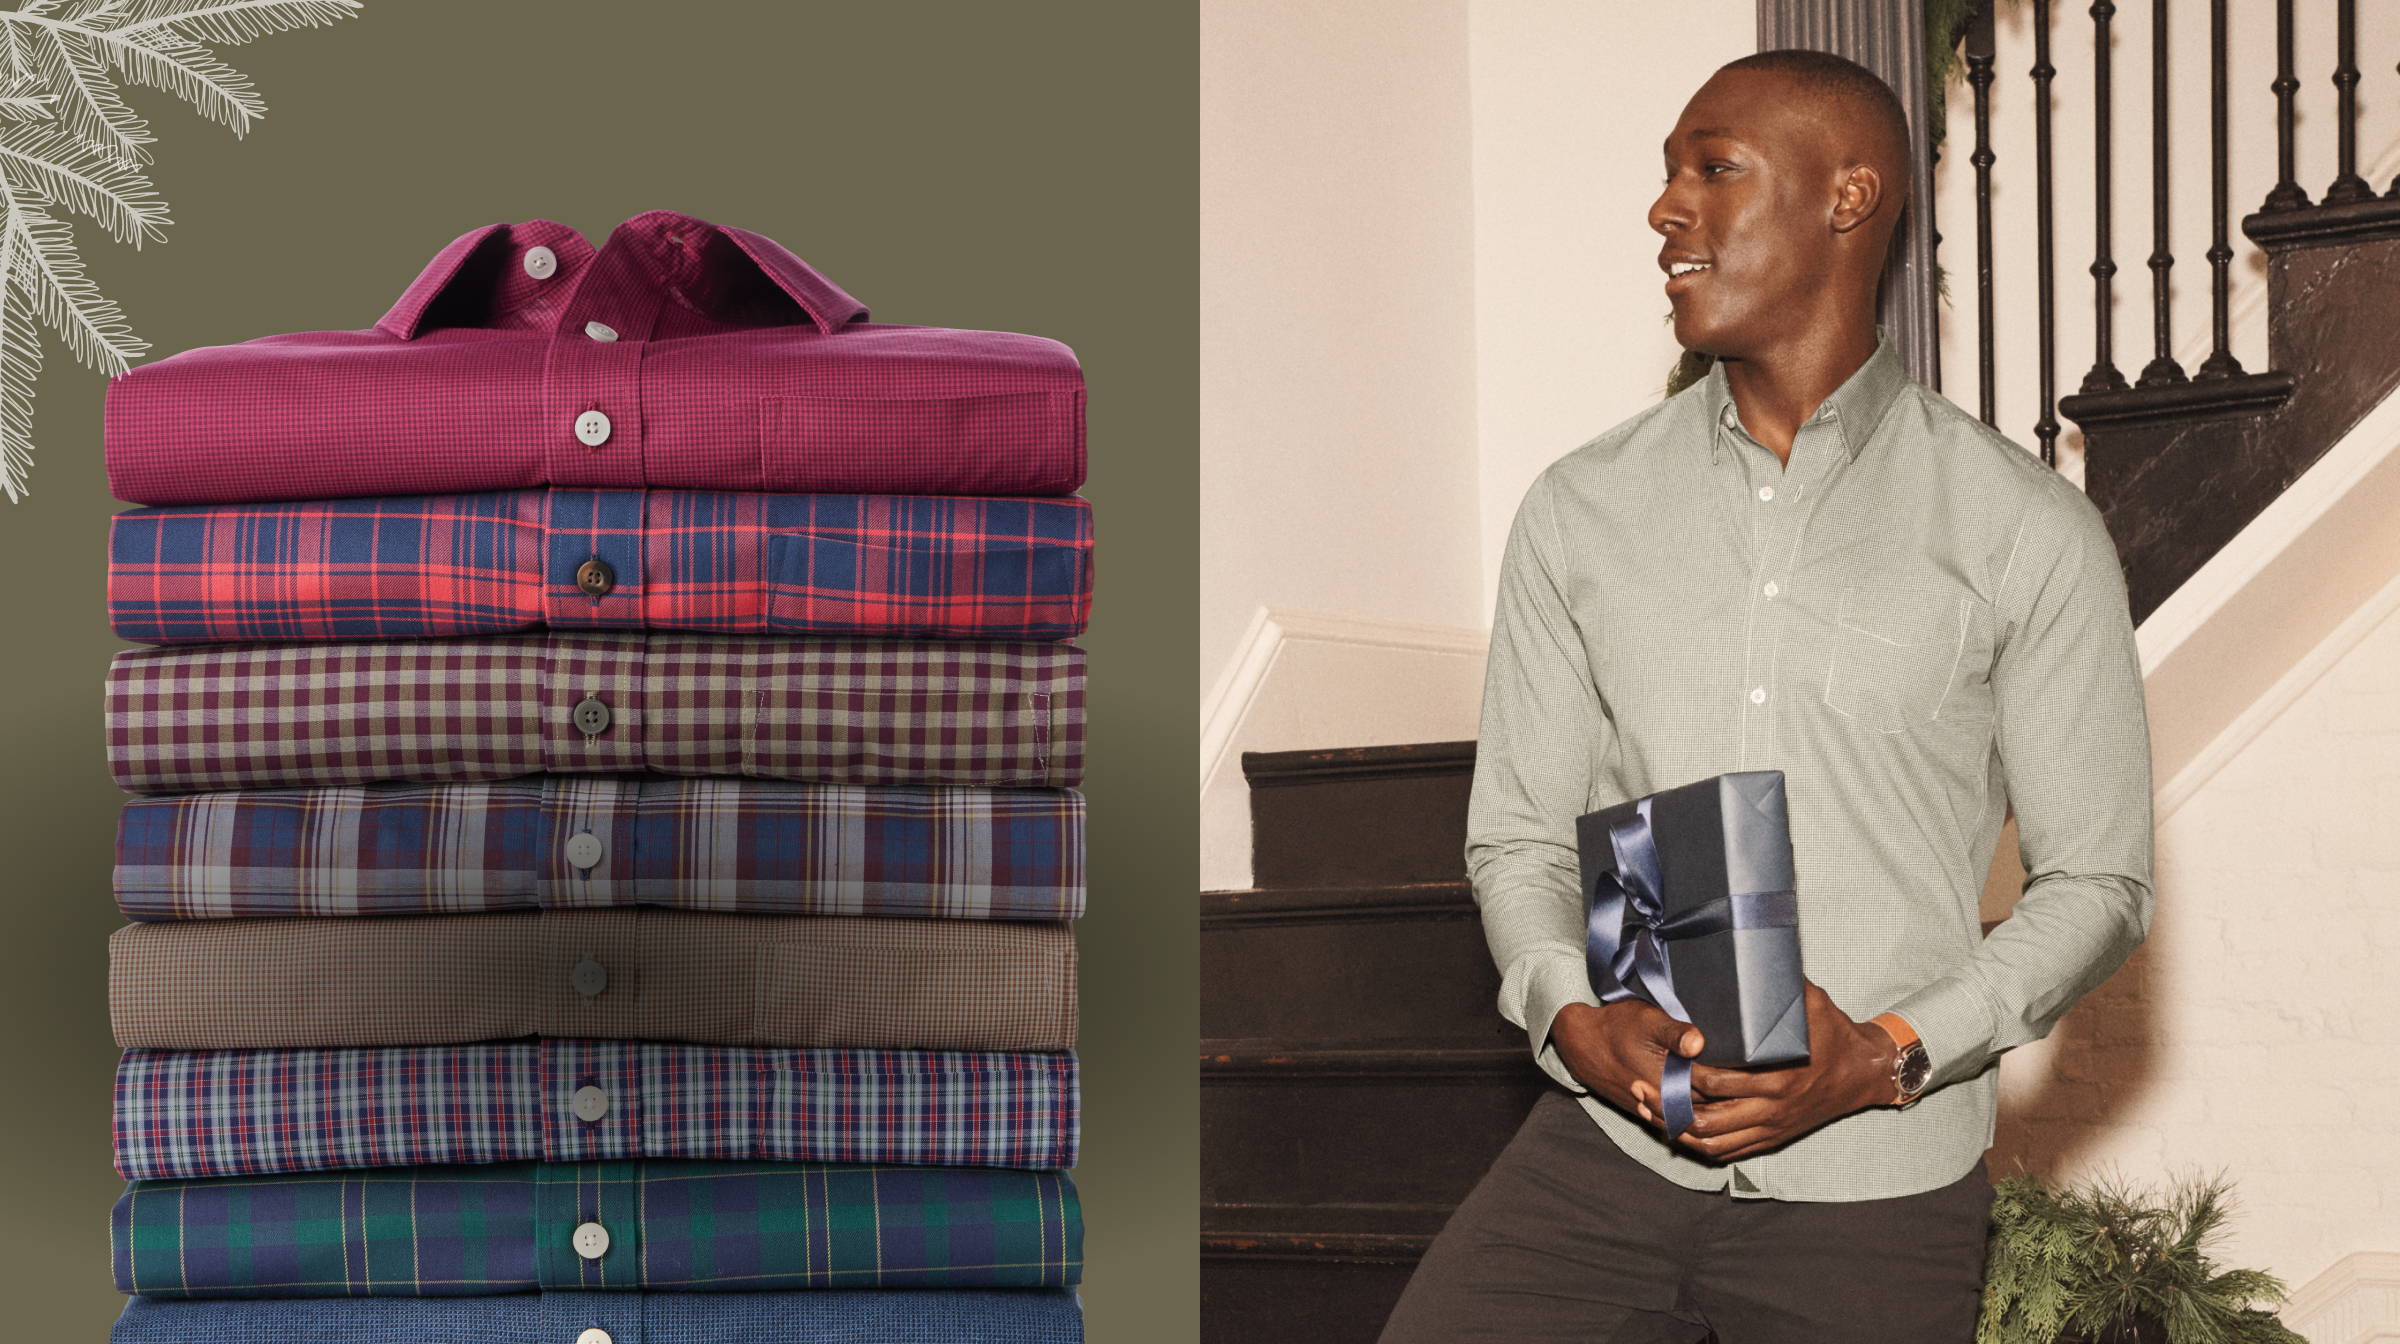 Unwrap wrinkle free. He'll love these sharp styles he can wear year-round.